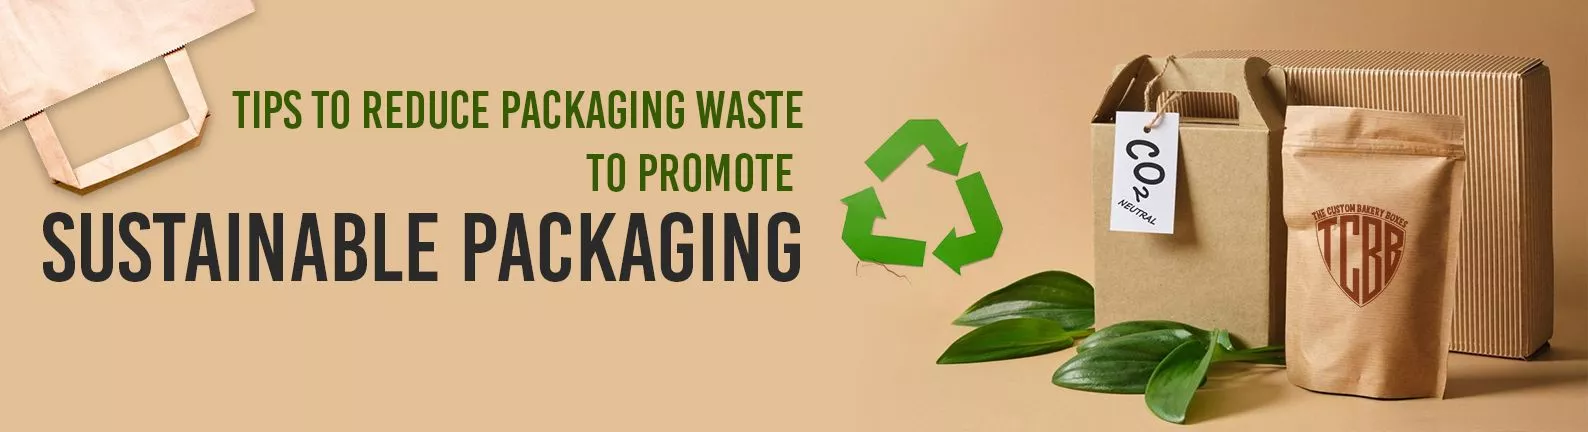 Tips-To-Reduce-Packaging-Waste-To-Promote-Sustainable-Packaging